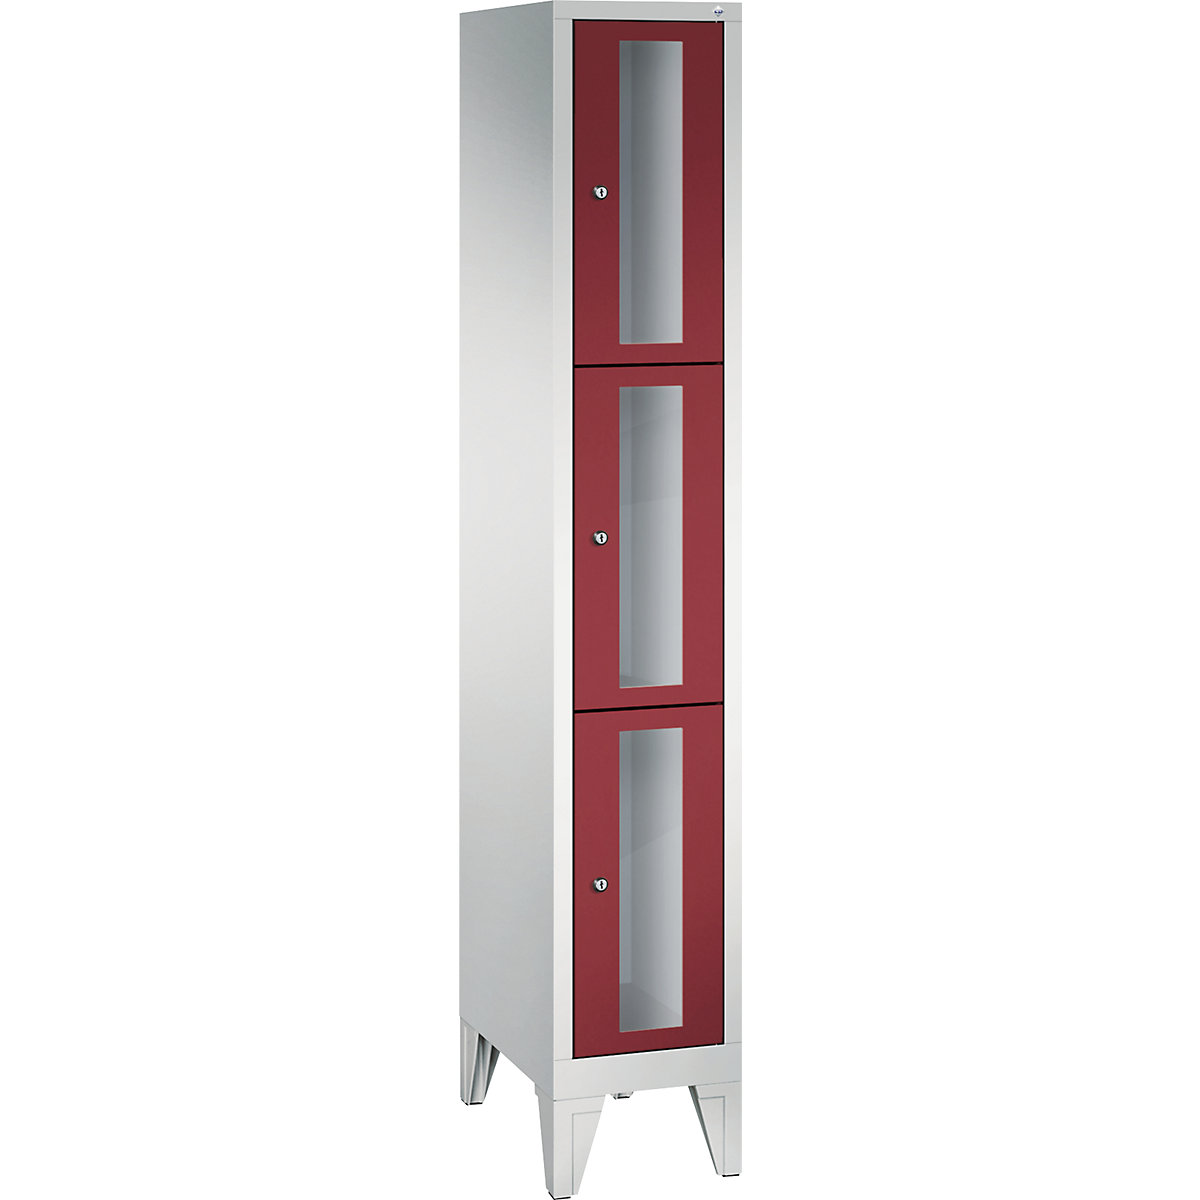 CLASSIC locker unit, compartment height 510 mm, with feet – C+P, 3 compartments, width 320 mm, ruby red door-6